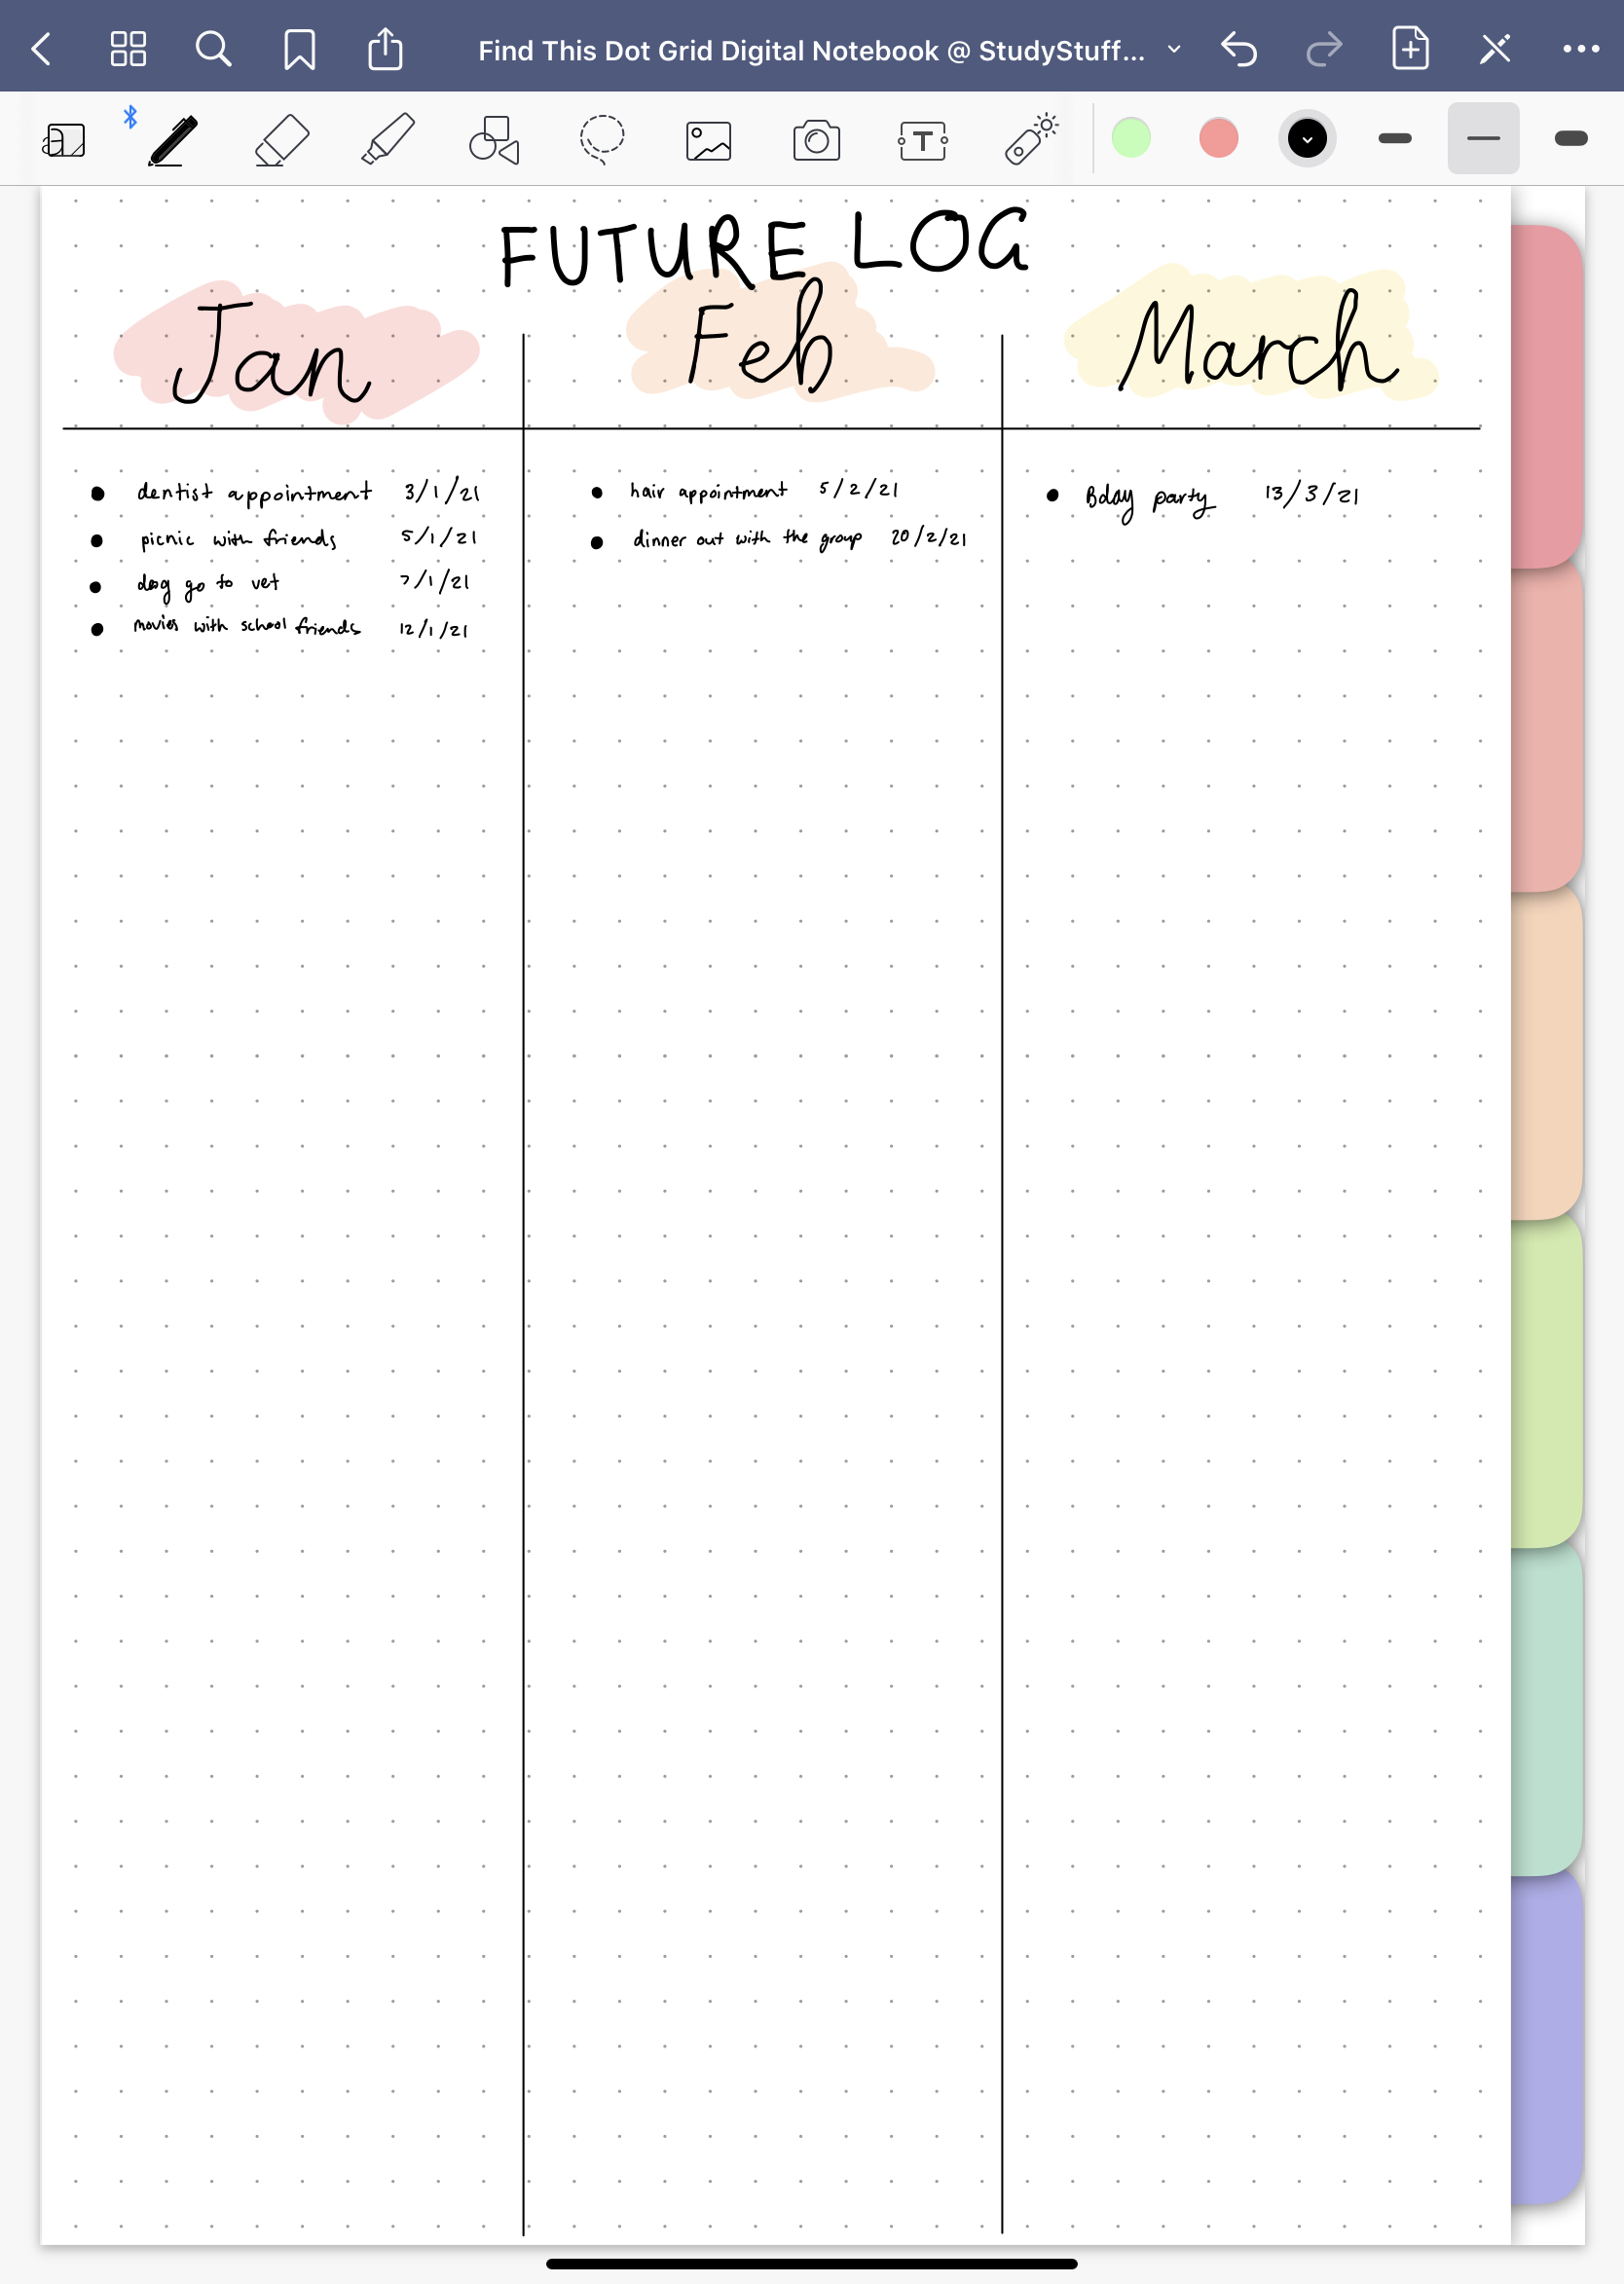 How To Make DIGITAL Bullet Journal Templates and Sell Them 